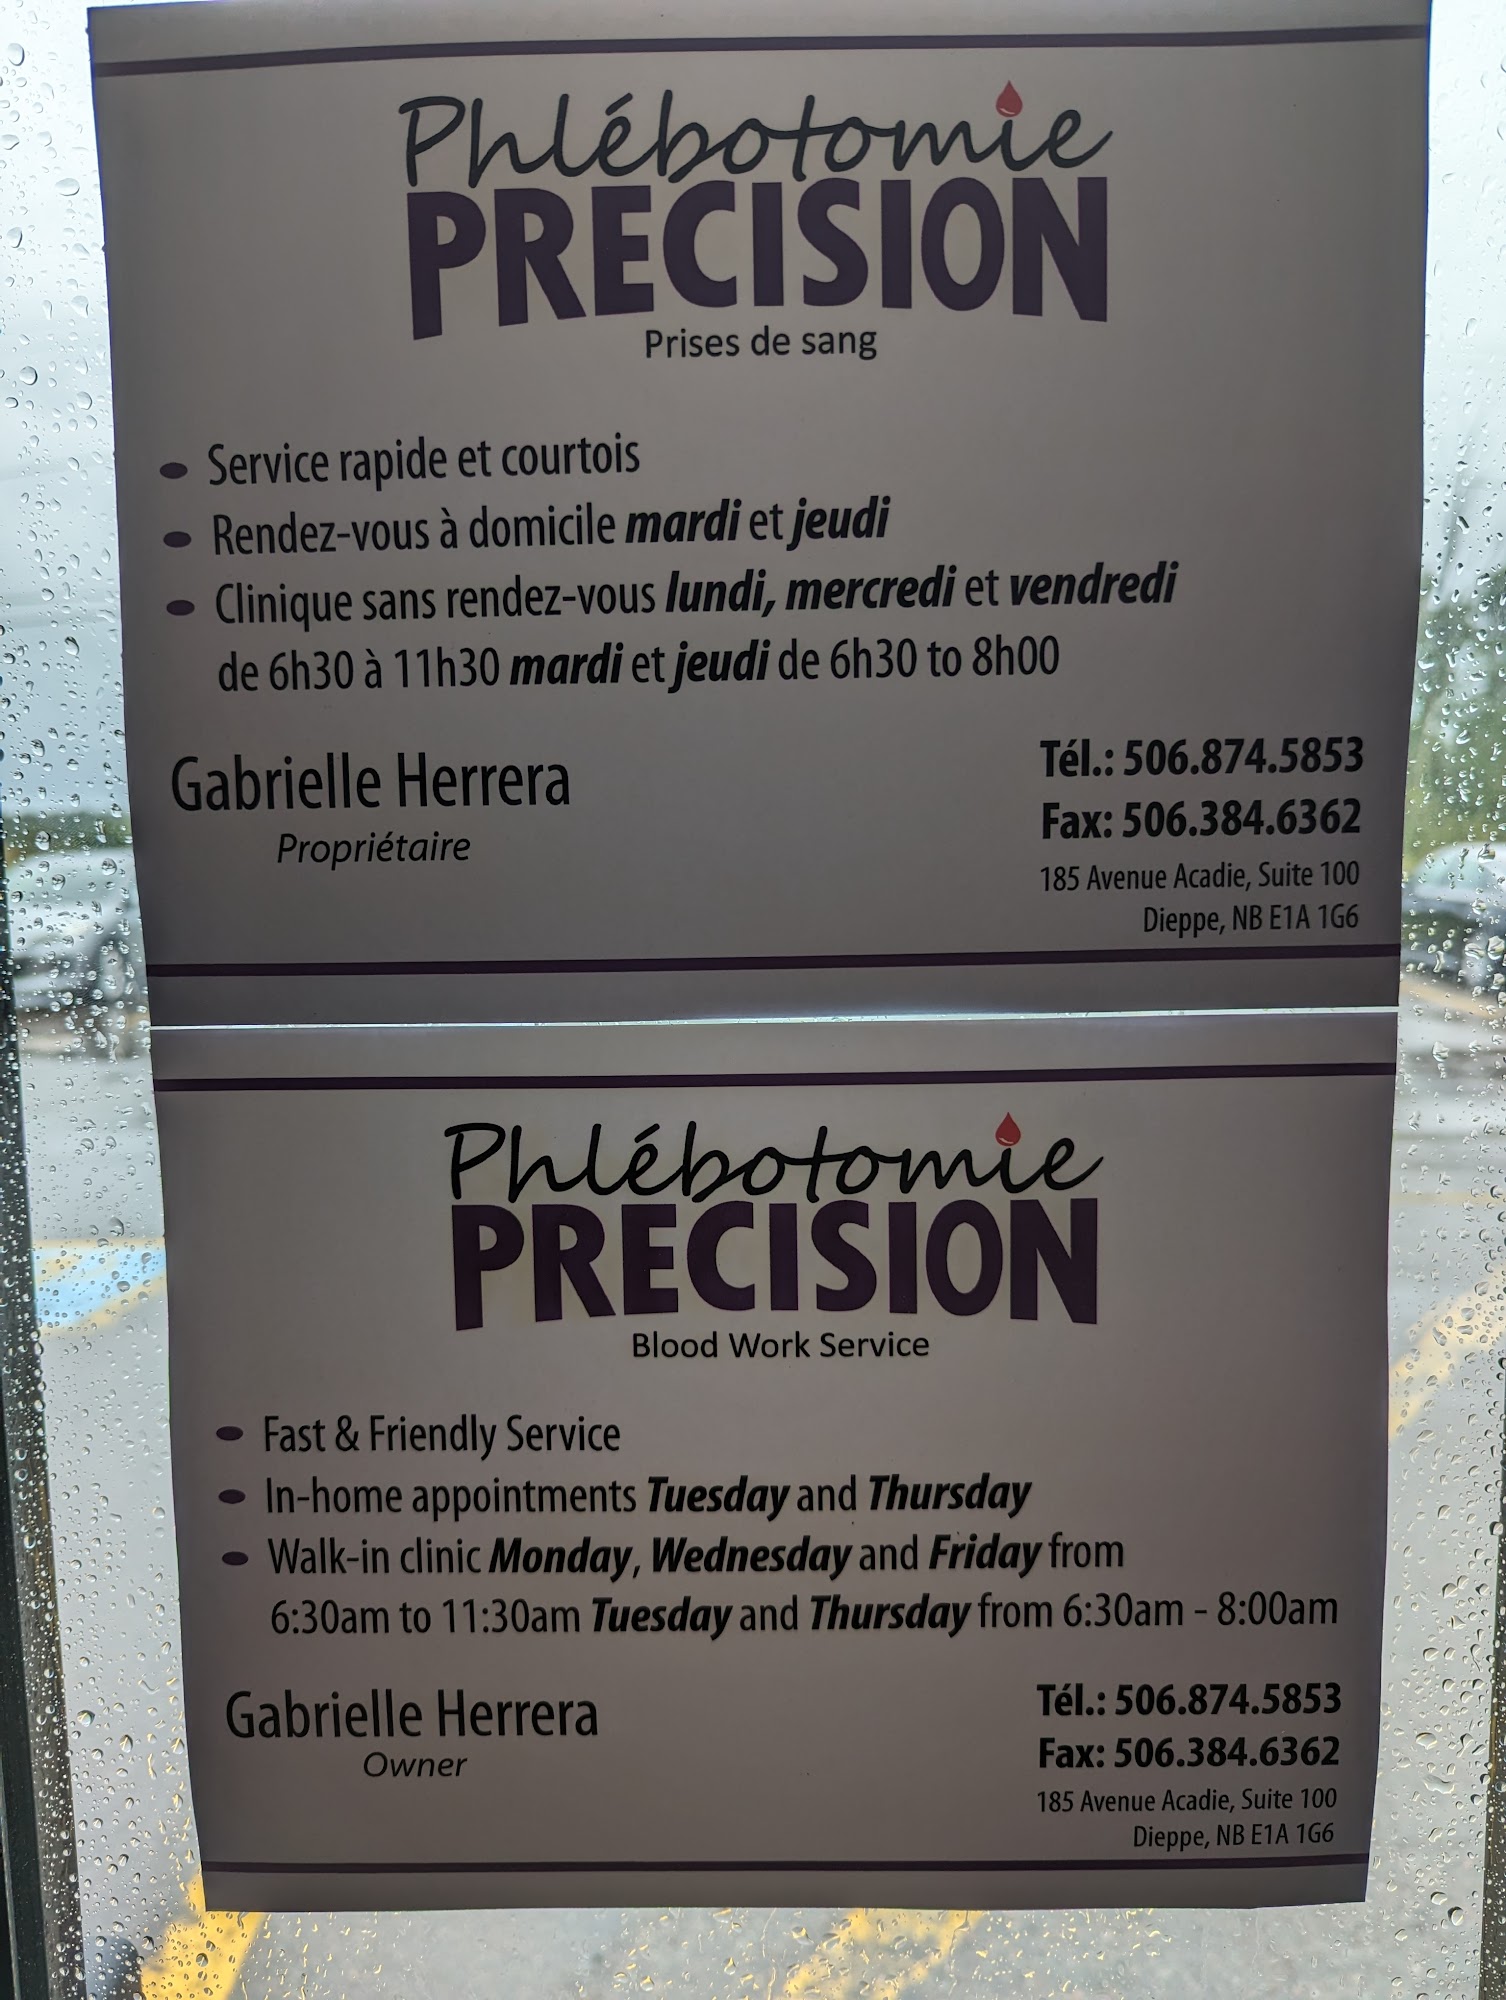 Phlebotomie Precision 185 Acadie Ave Suite 100, Dieppe New Brunswick E1A 1G6